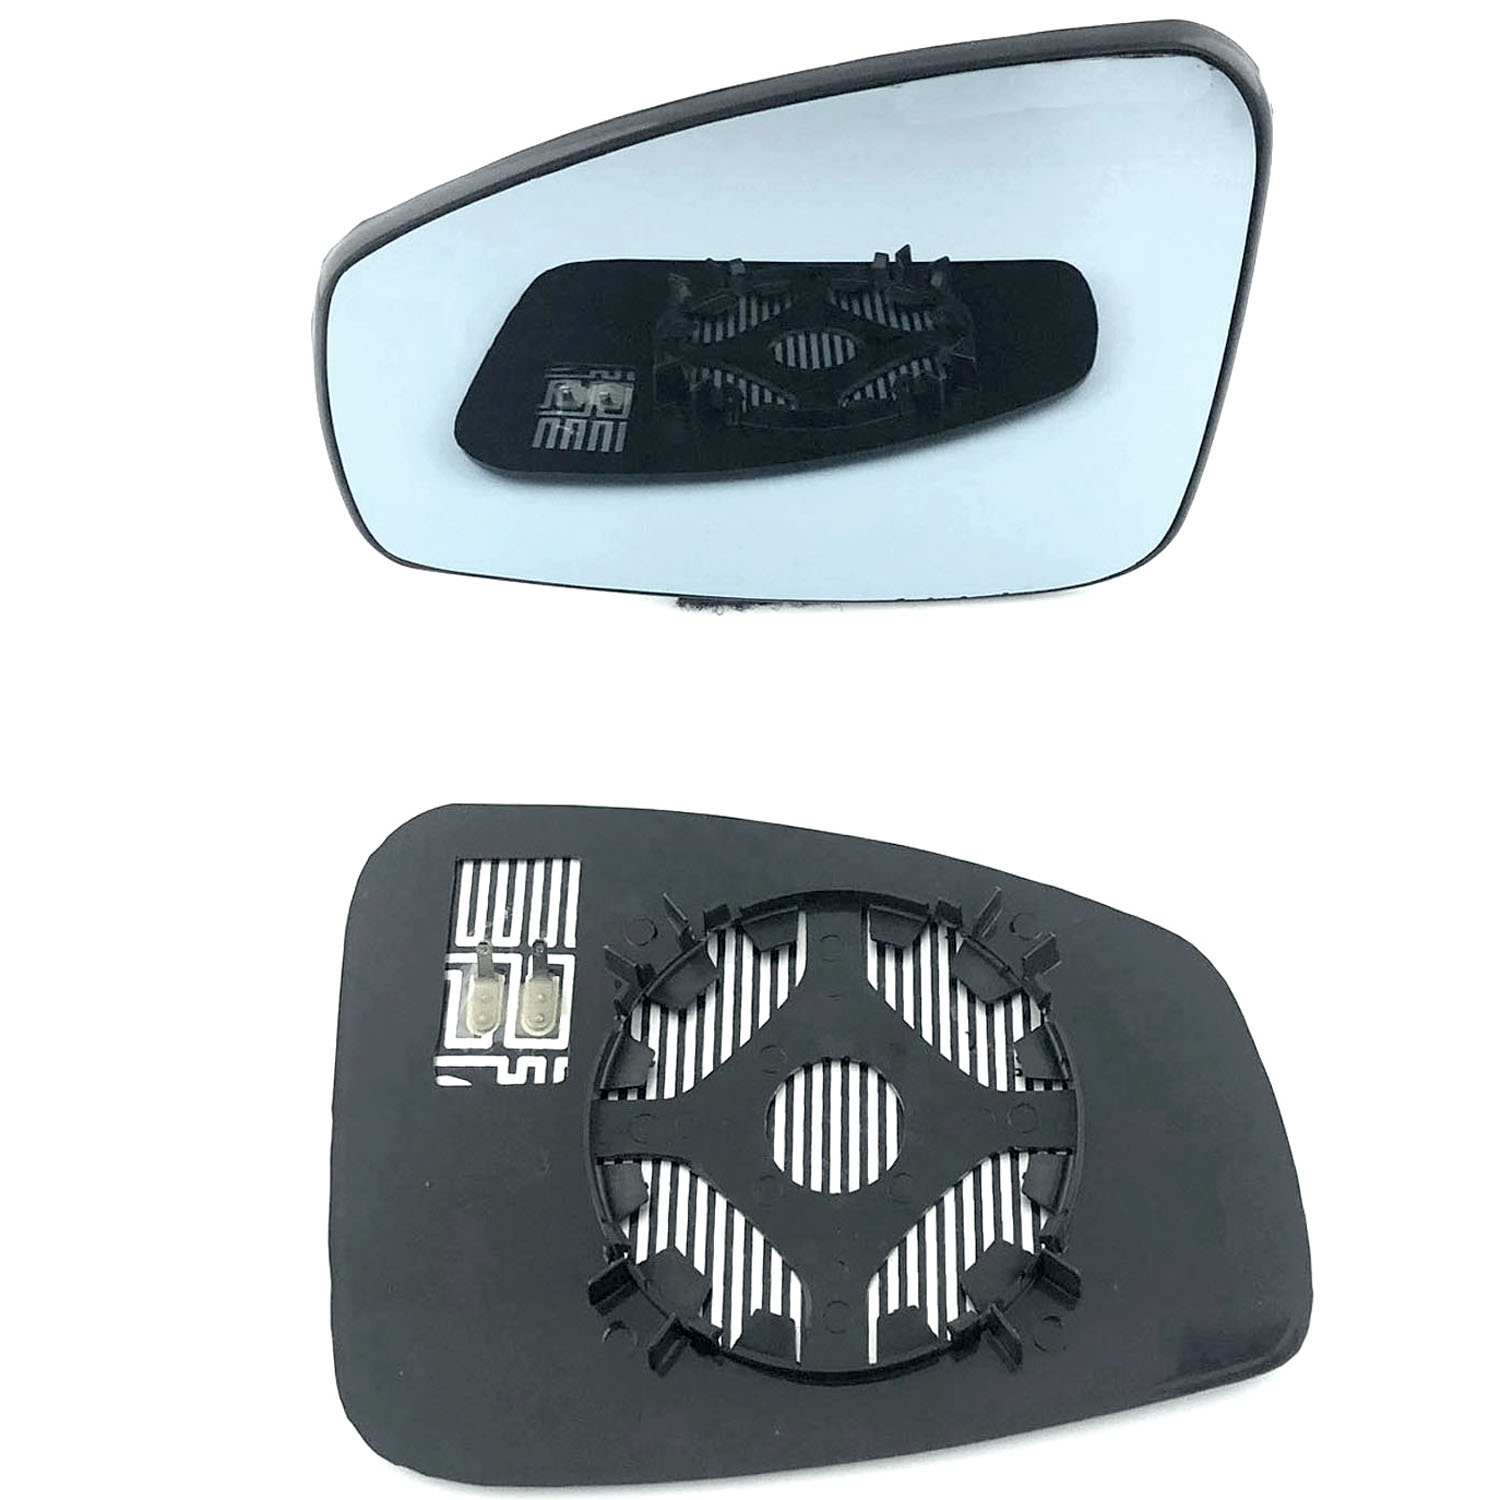 Renault Laguna Wing Mirror Glass With Base LEFT HAND ( UK Passenger Side ) 2008 to 2015 – Heated Base Convex Mirror